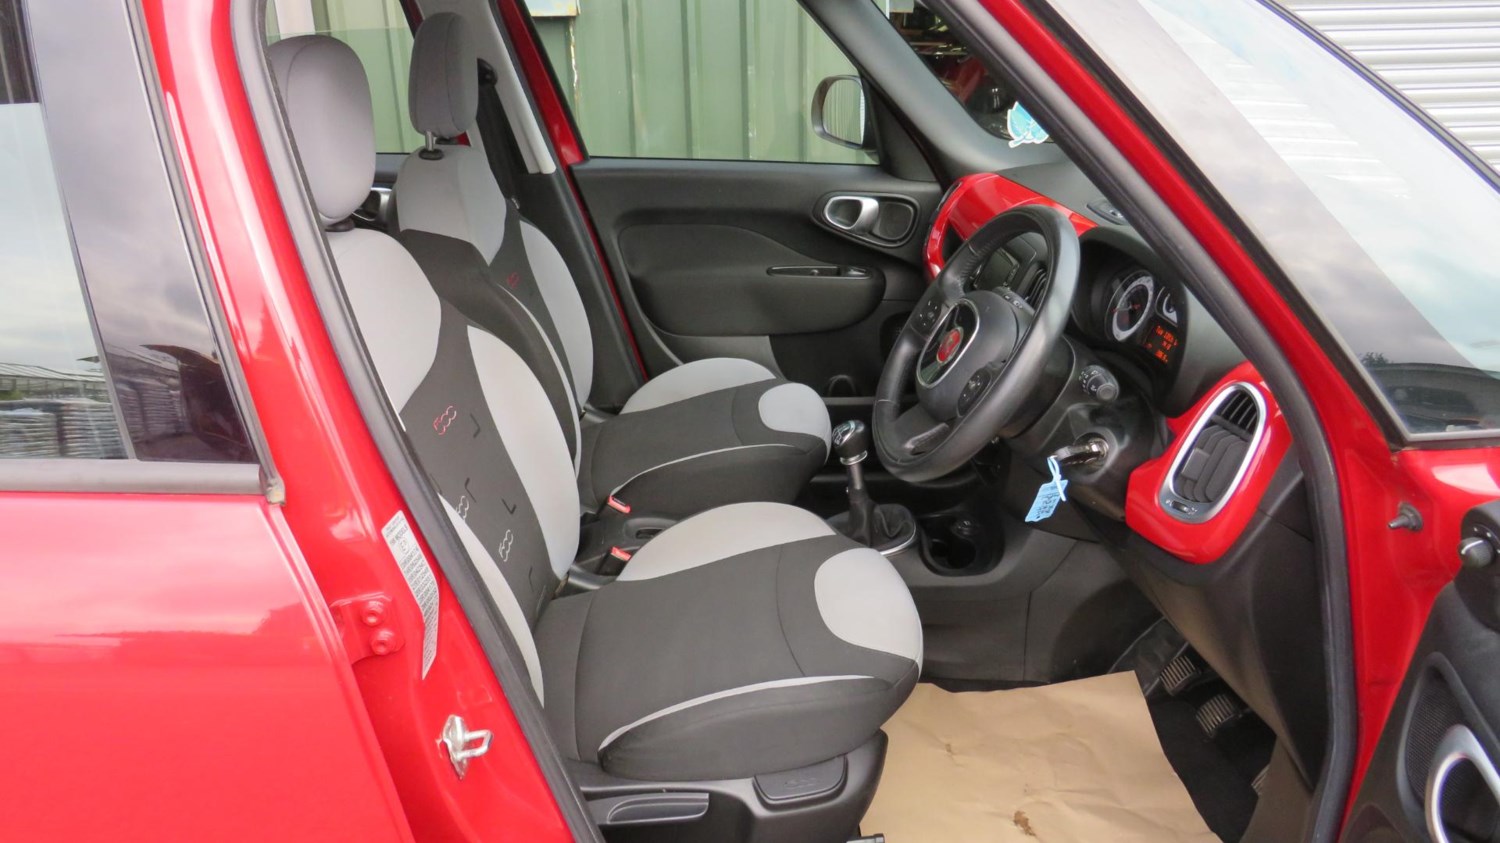 2015 (15) Fiat 500L MPW 1.4 Pop STAR 5 DOOR For Sale In Bashley, Hampshire